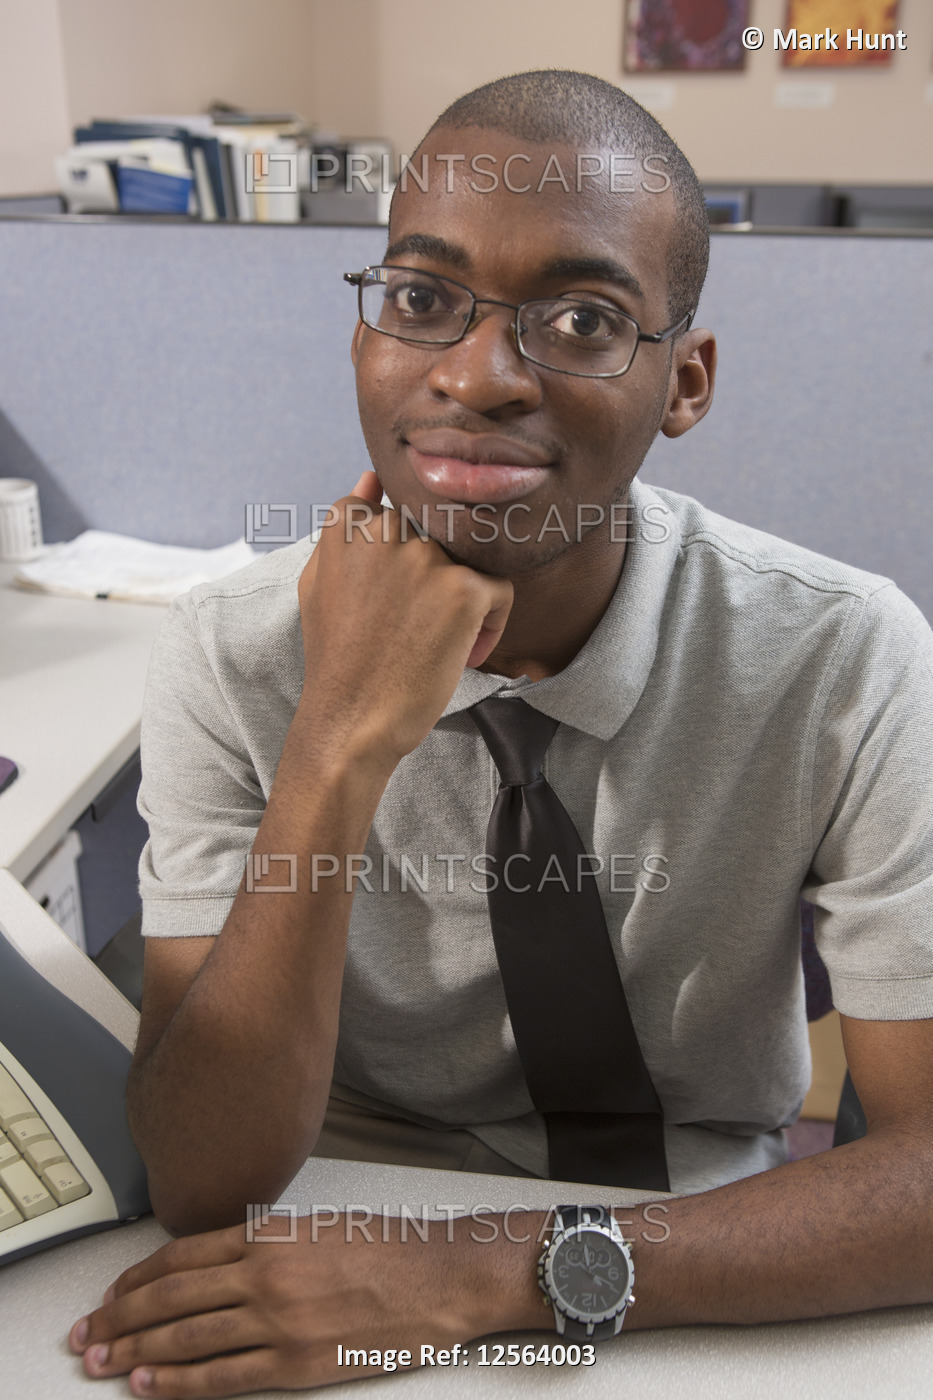 Portrait of African American man with Autism working in an office